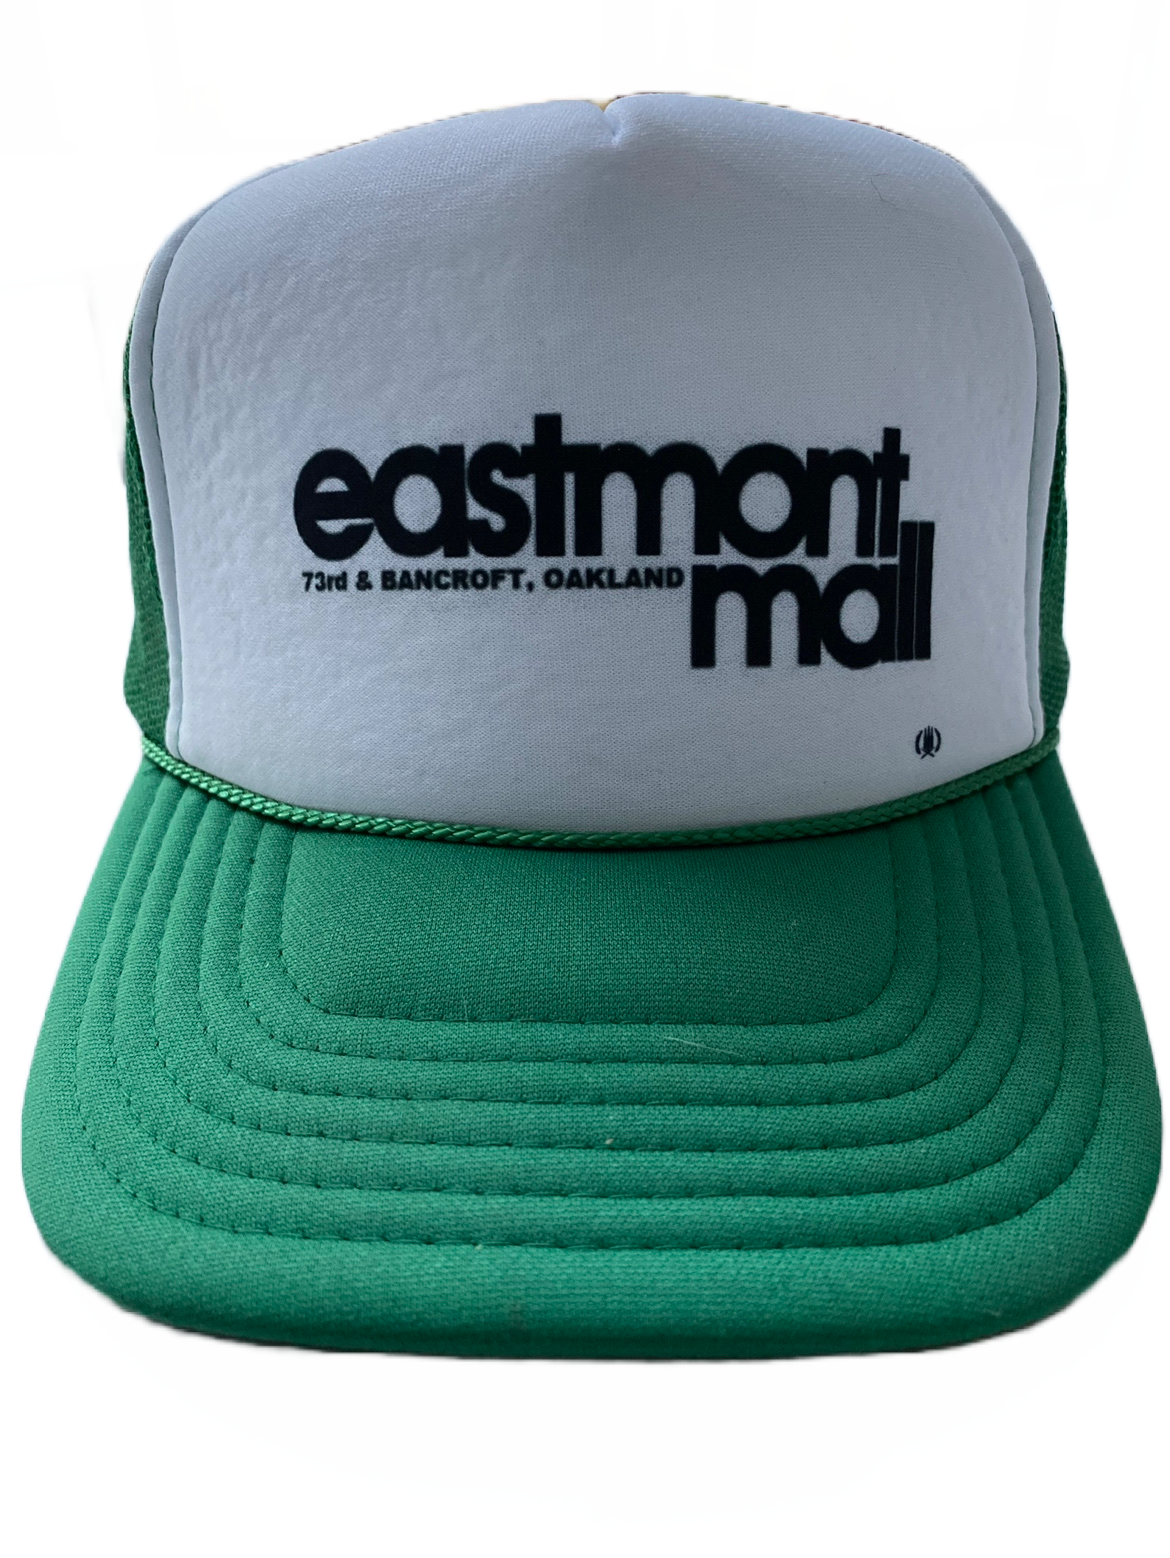 The Town Jewel: The Eastmont Mall Hat